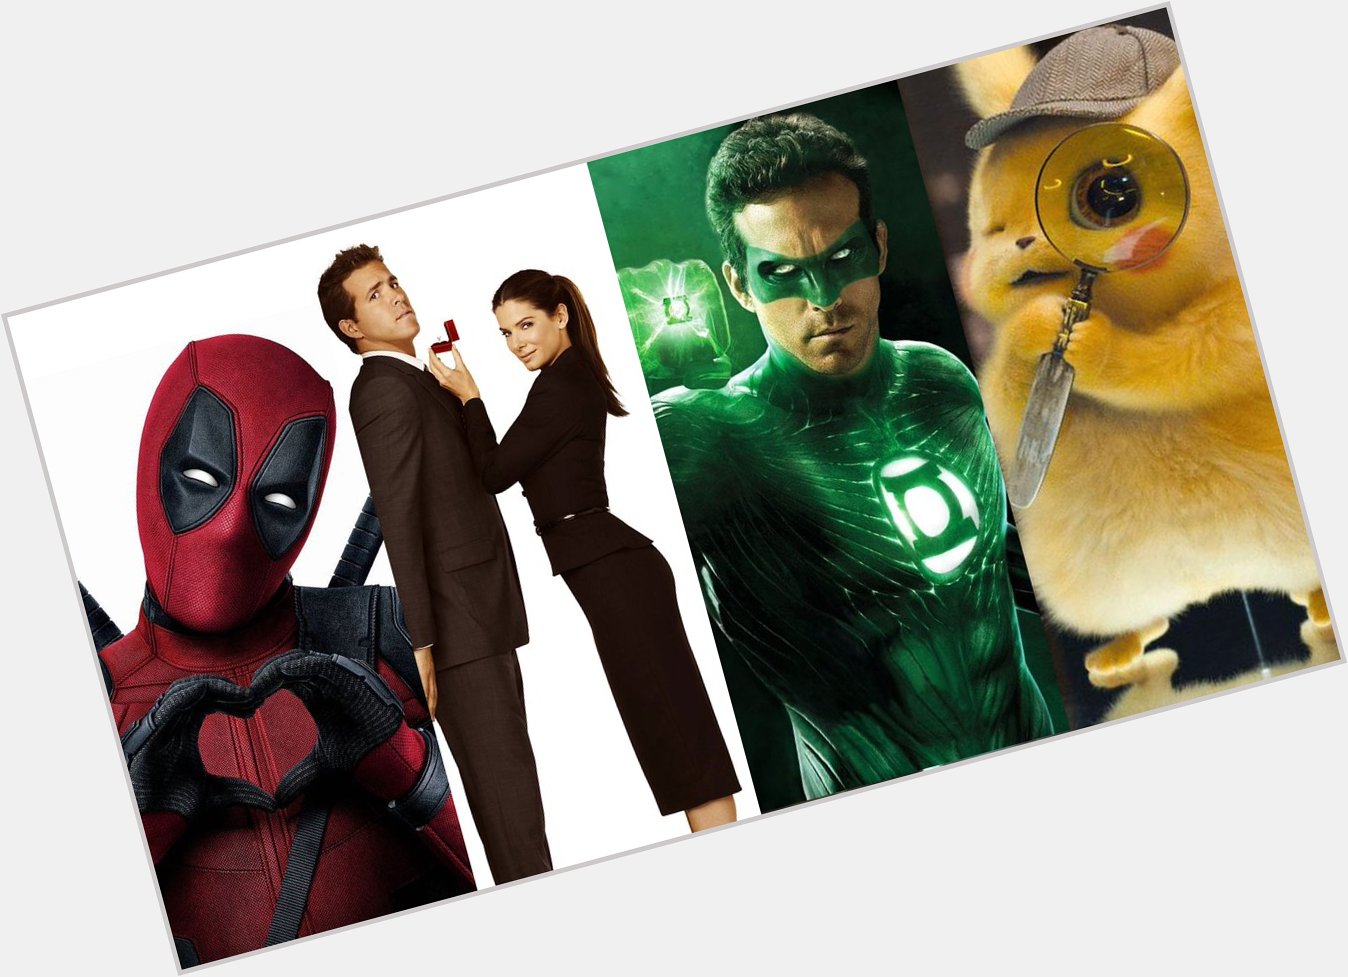 Happy Birthday, Ryan Reynolds! Thanks for some awesome movies. What\s your favorite Ryan Reynolds movie?  